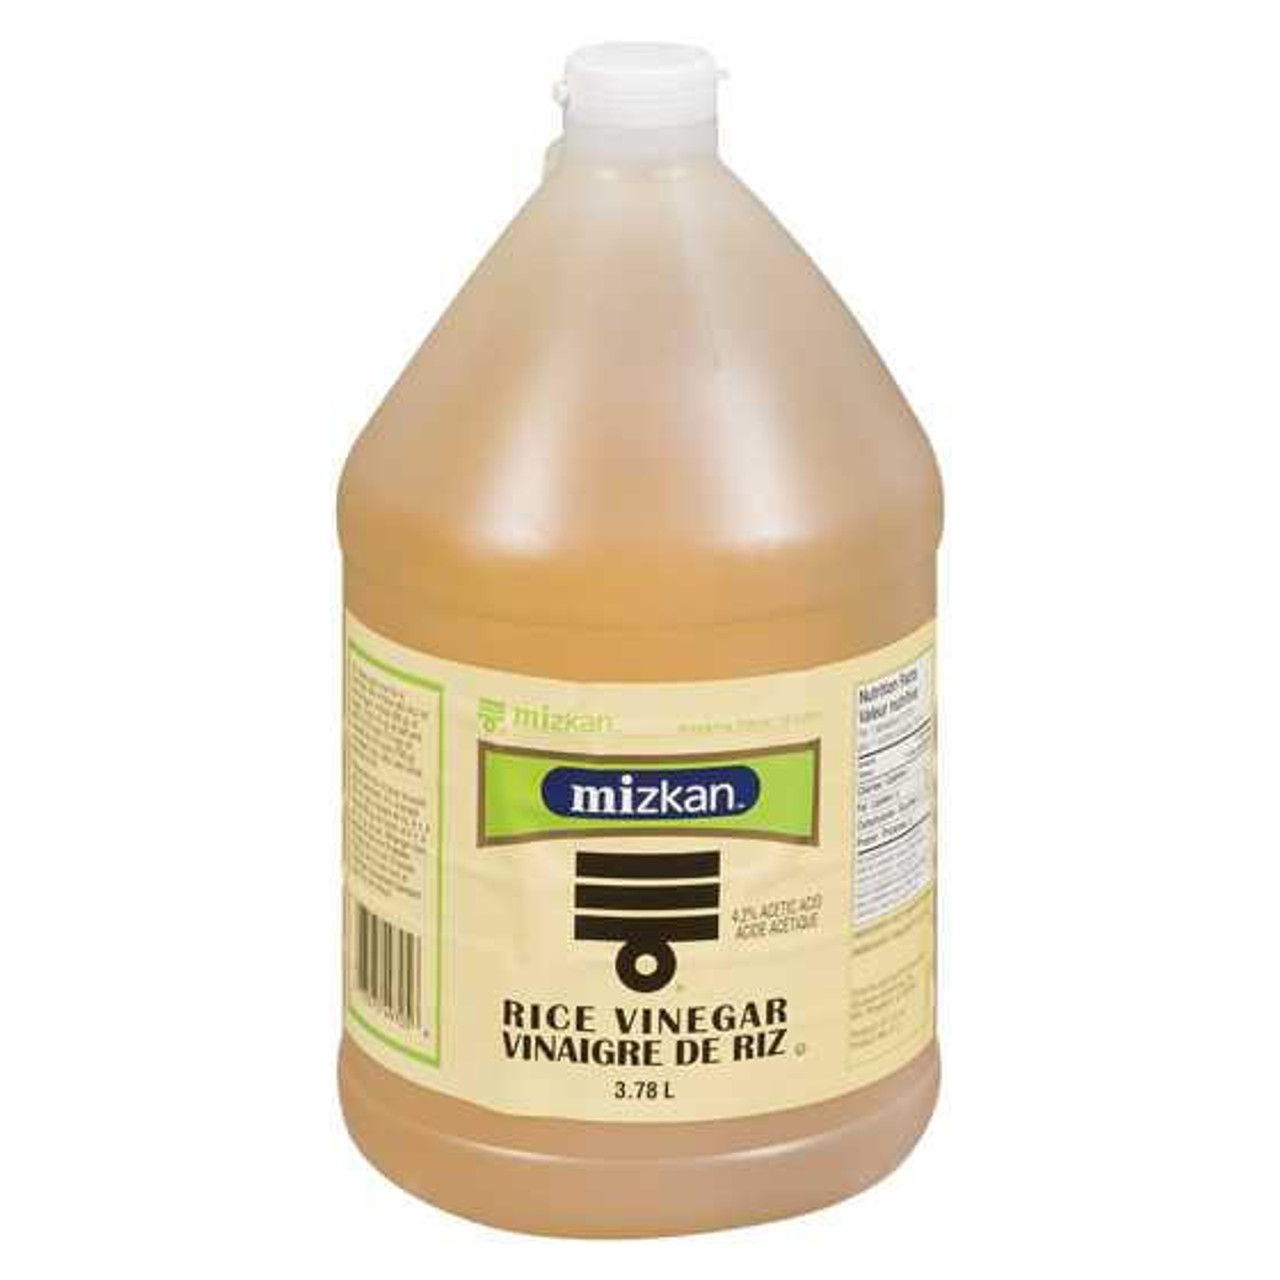  MIZKAN Mitsukan Rice Vinegar | 3.78 Litre - Authentic Japanese Flavor for Your Culinary Creations 